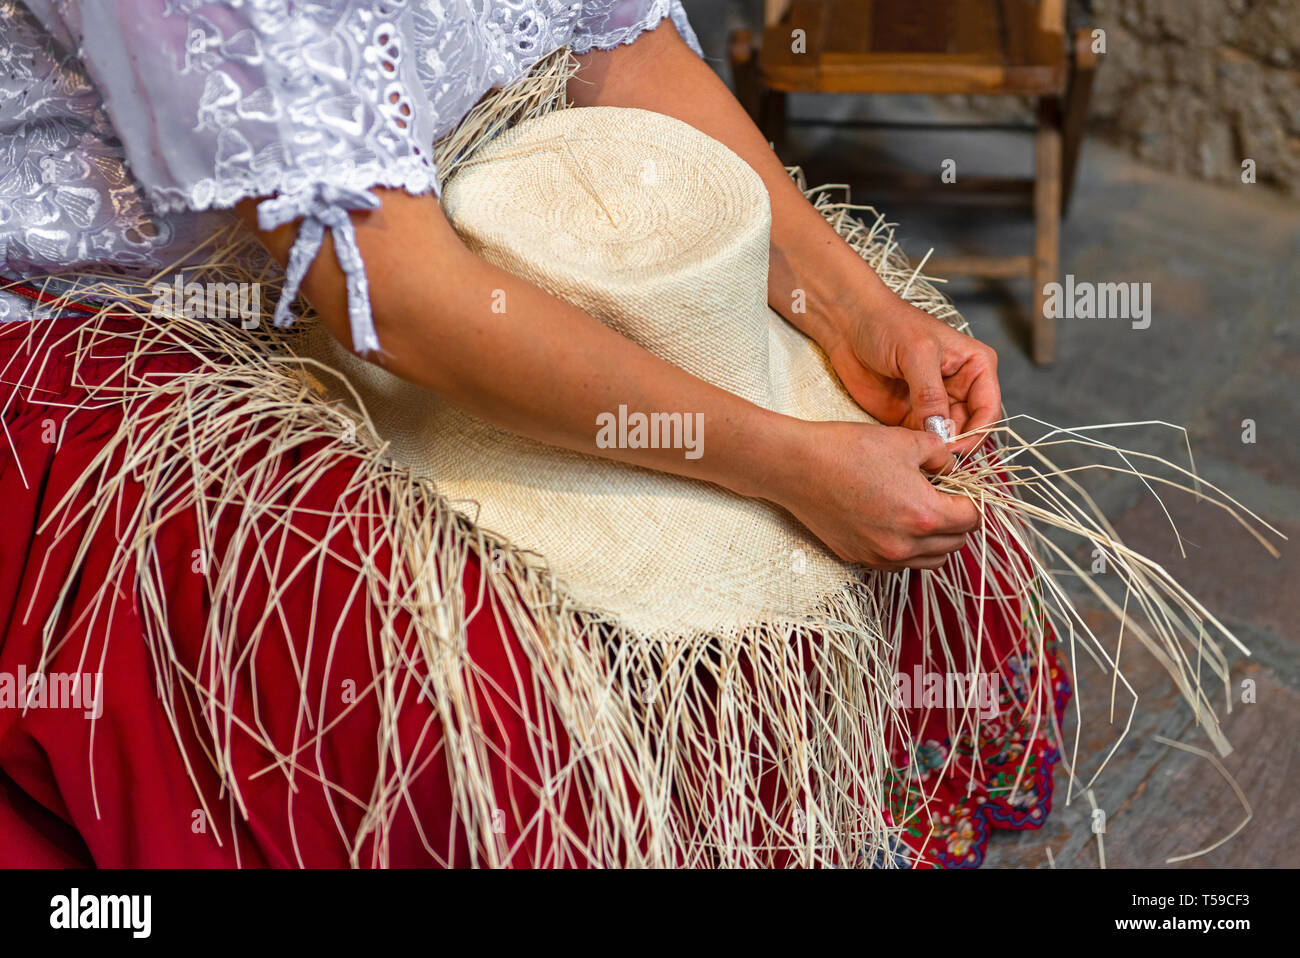 Woman weaving a Panama hat or brimmed straw hat from Toquilla palm fibers. The technique is on the Unesco Intangible Cultural list of Cuenca, Ecuador. Stock Photo